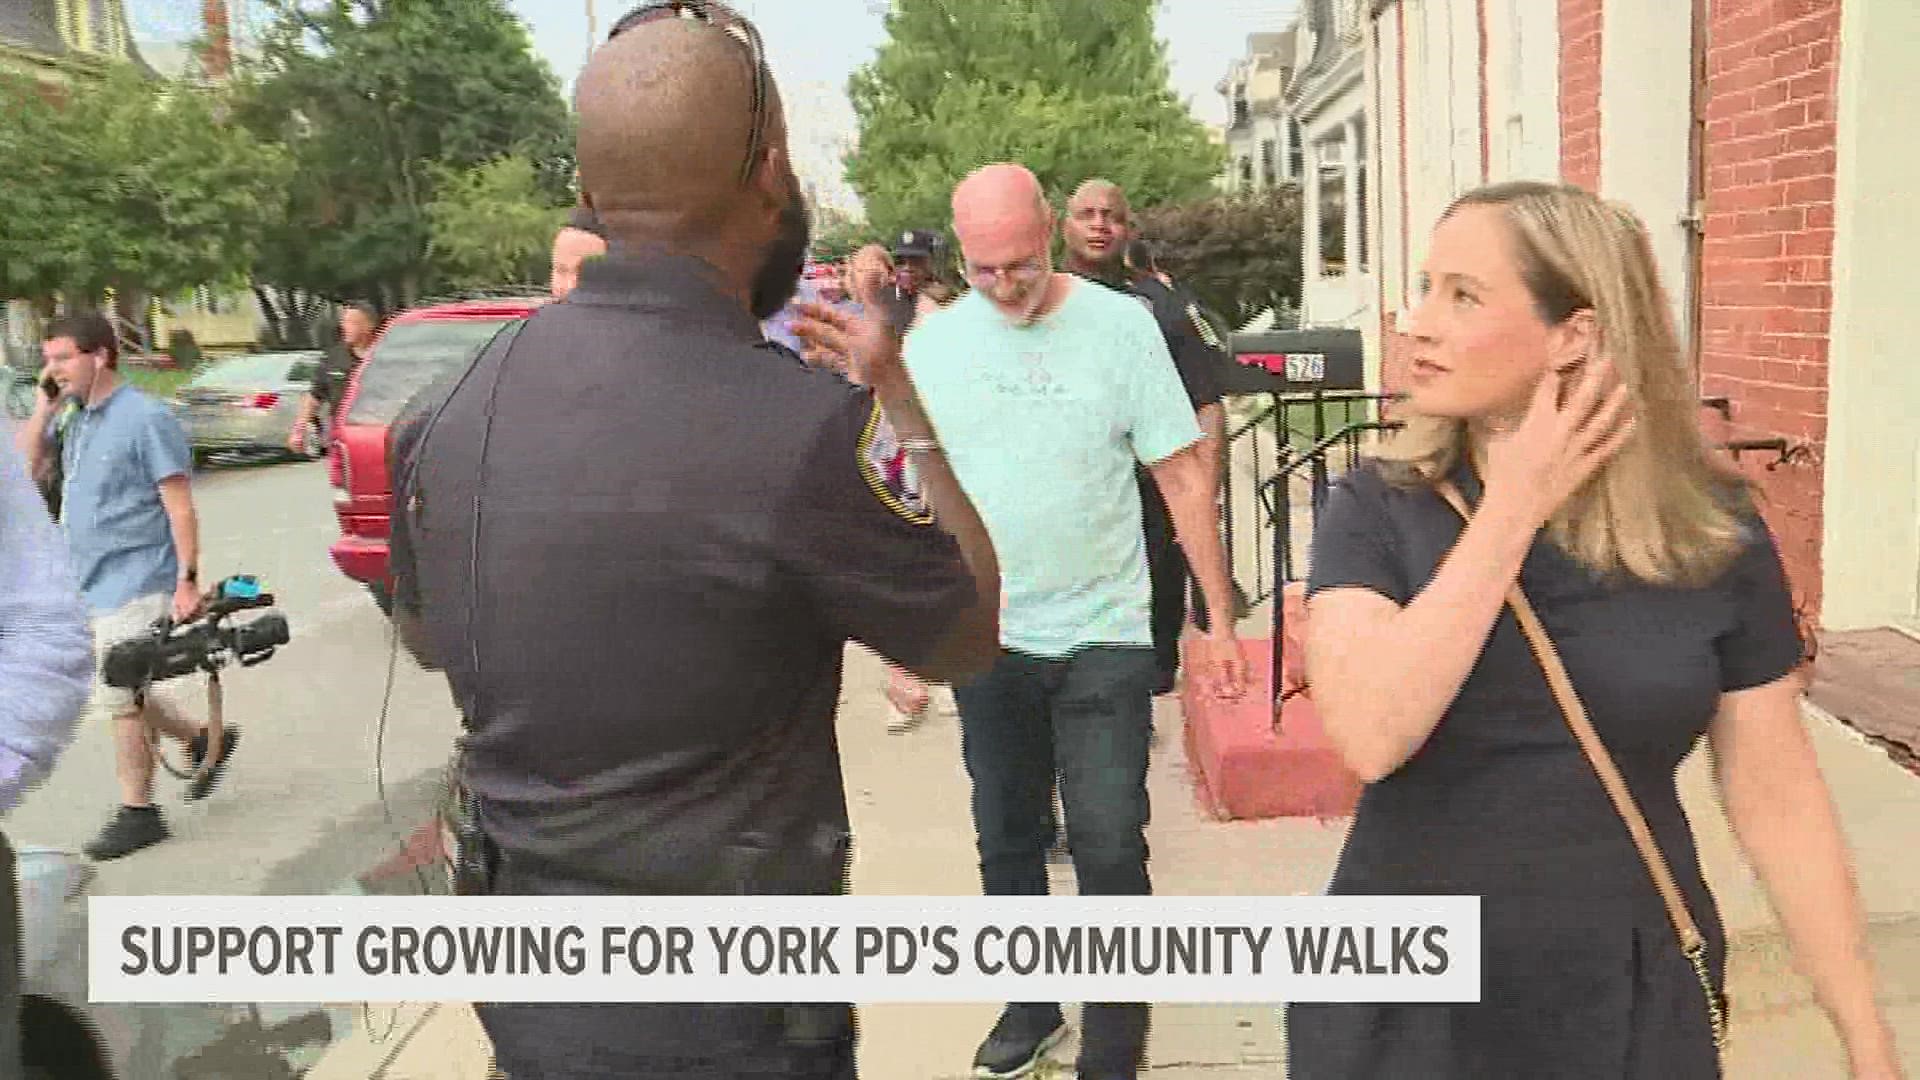 Police chiefs from Harrisburg and Carlisle joined in York Police’s community walk program, founded to improve police-community relations.